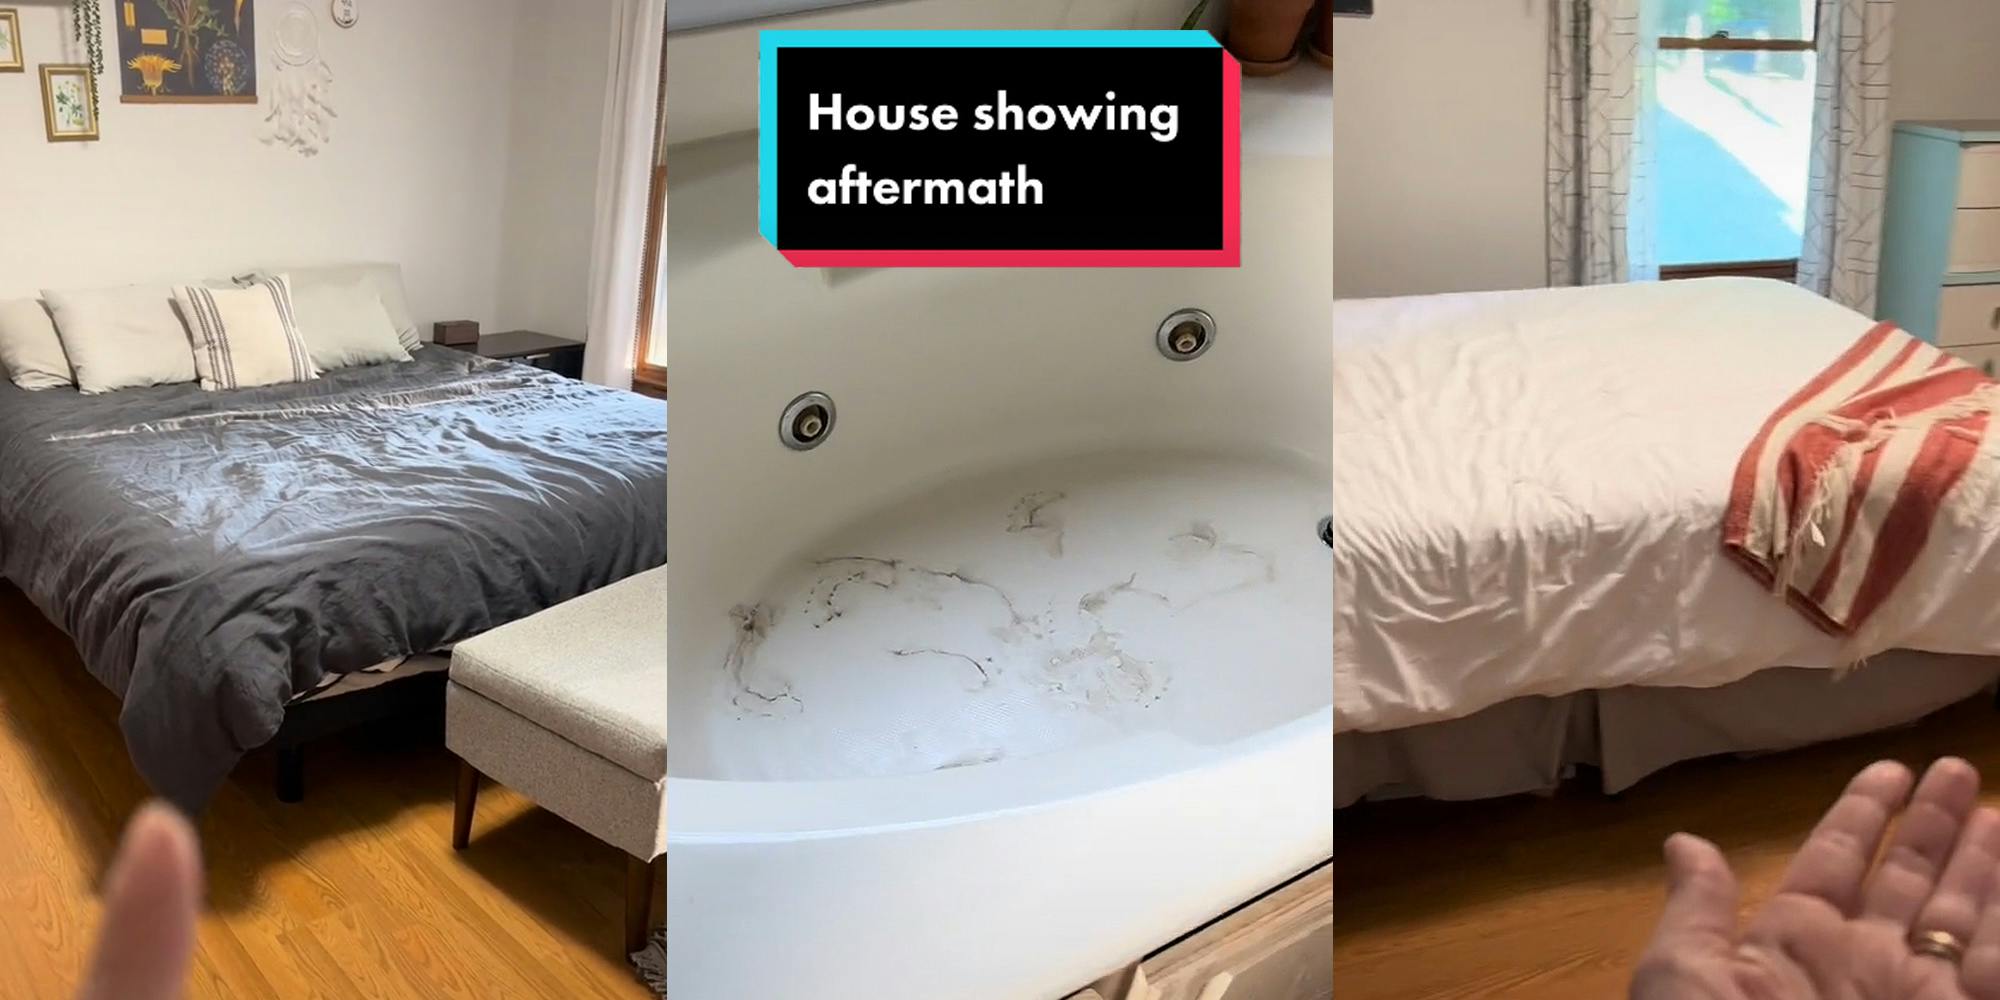 woman pointing finger to messed up bed and moved bench (l) white bathtub with mud inside caption "House showing aftermath" (c) woman hand out showing messed up bed (r)